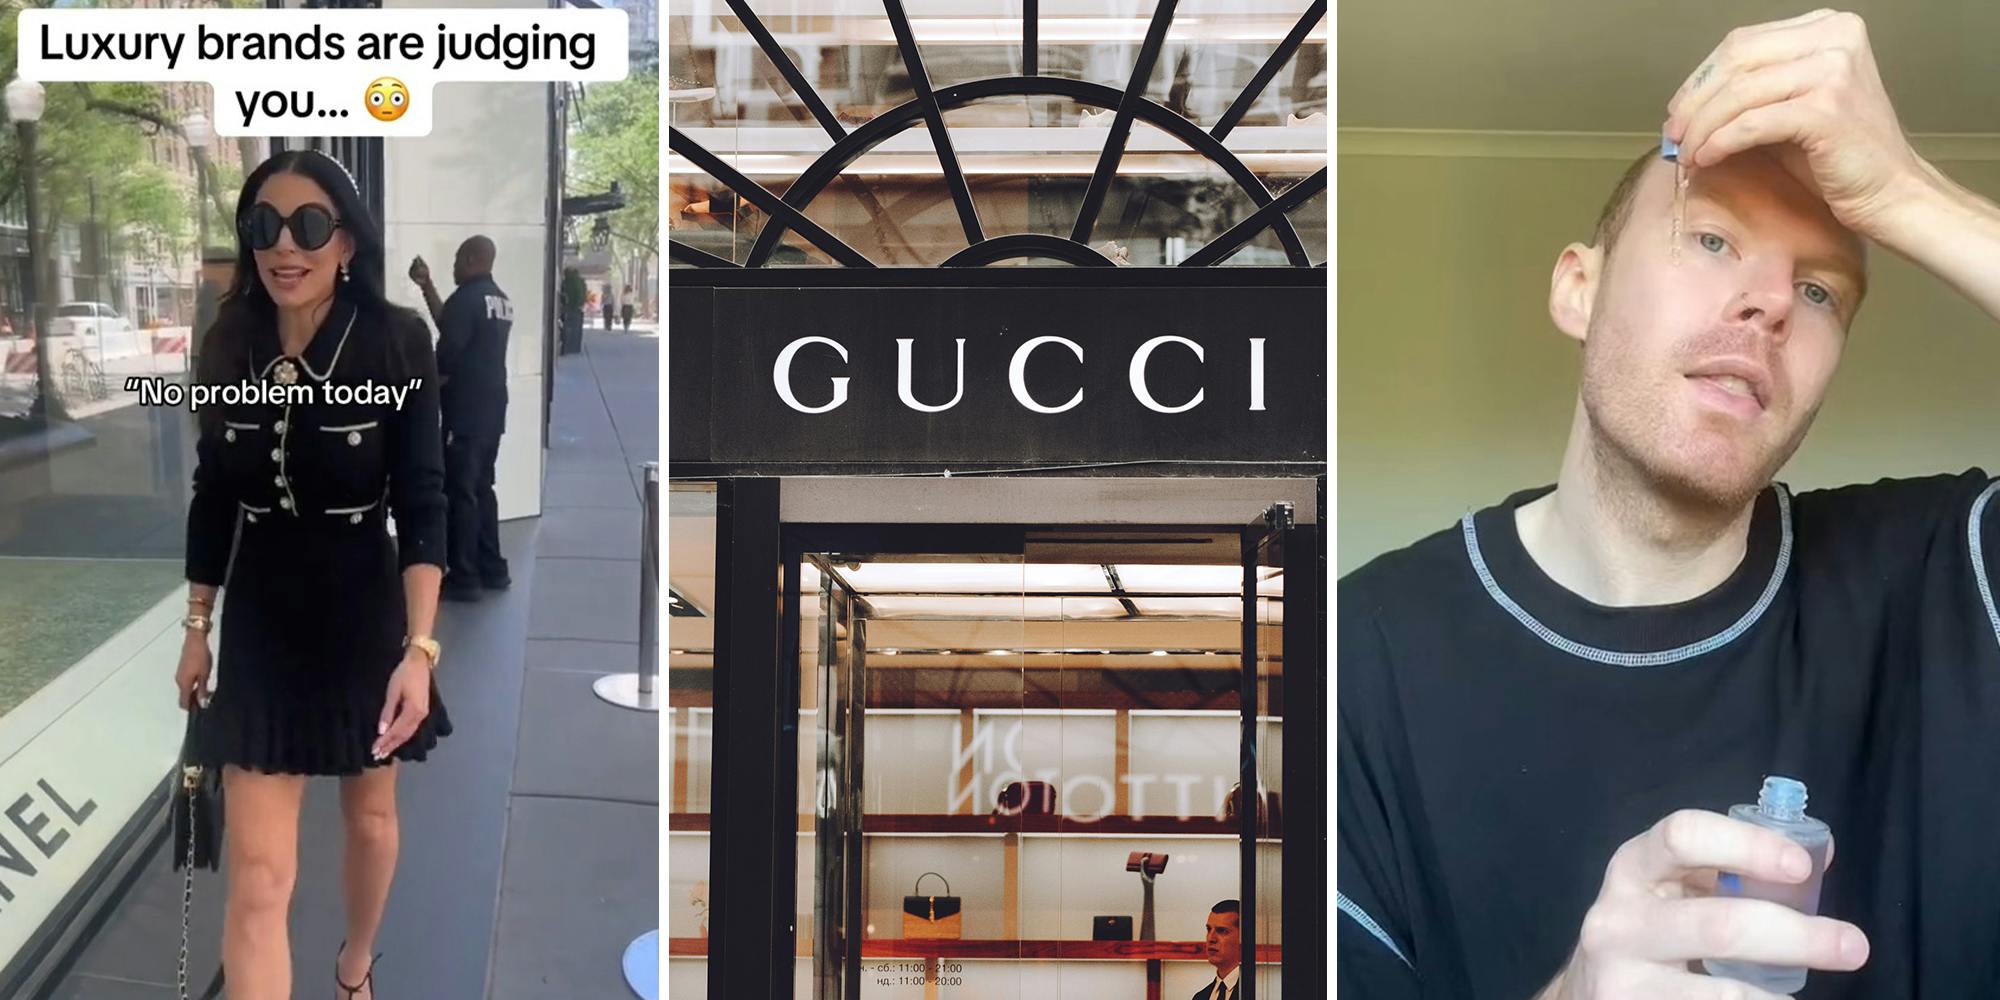 Gucci customer says workers ignored him because of how he was dressed, helped him when he came back dressed ‘properly’